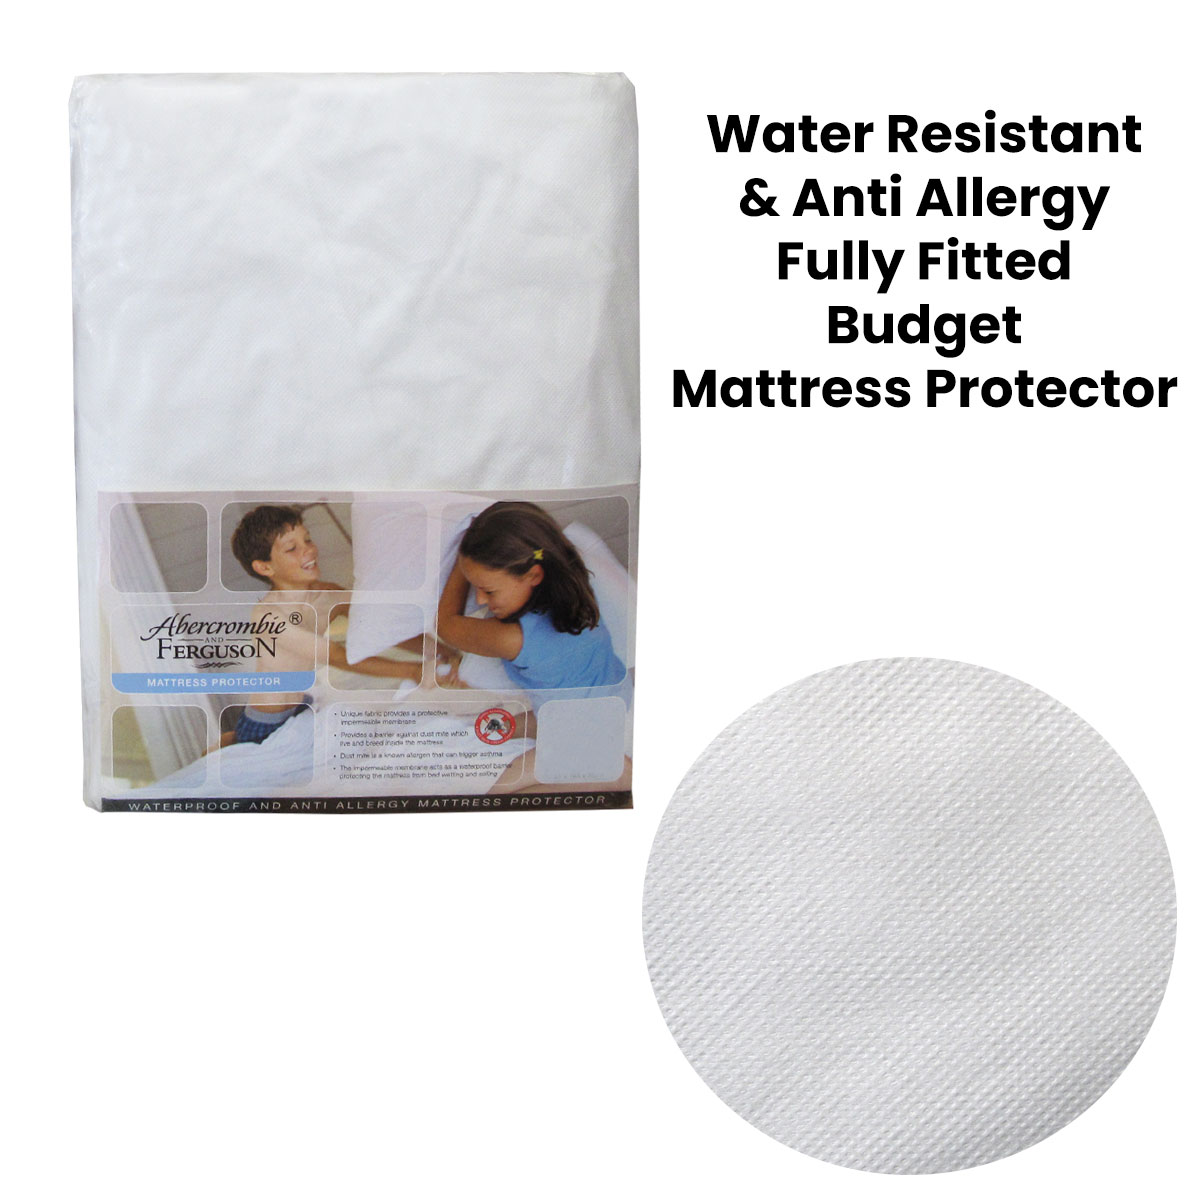 Water Resistant & Anti Allergy Fully Fitted Budget Mattress Protector by Abercrombie and Ferguson